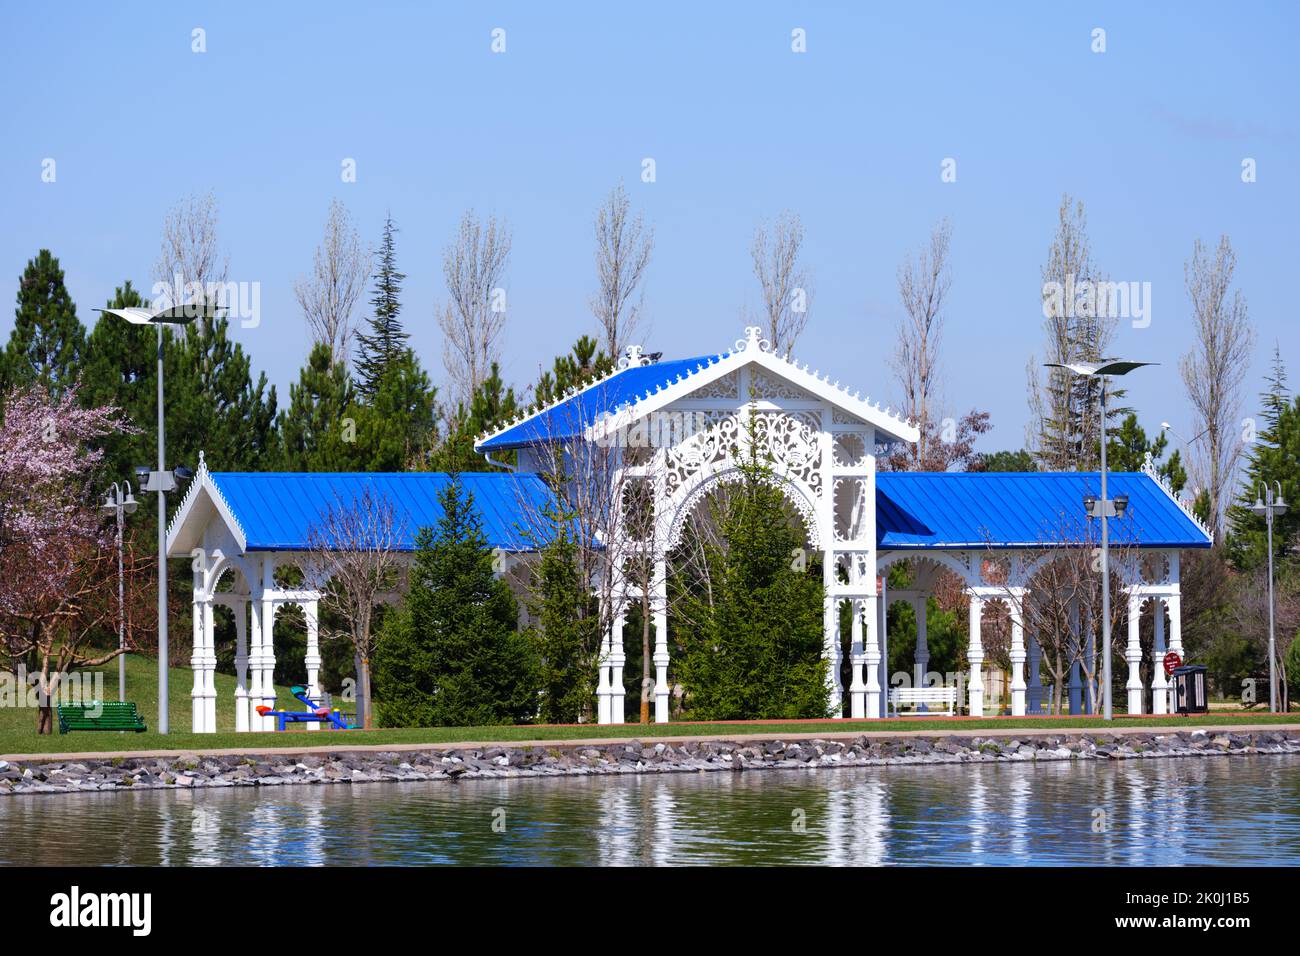 Nostalgic wooden train station with blue roof within trees lakeside in summer Stock Photo